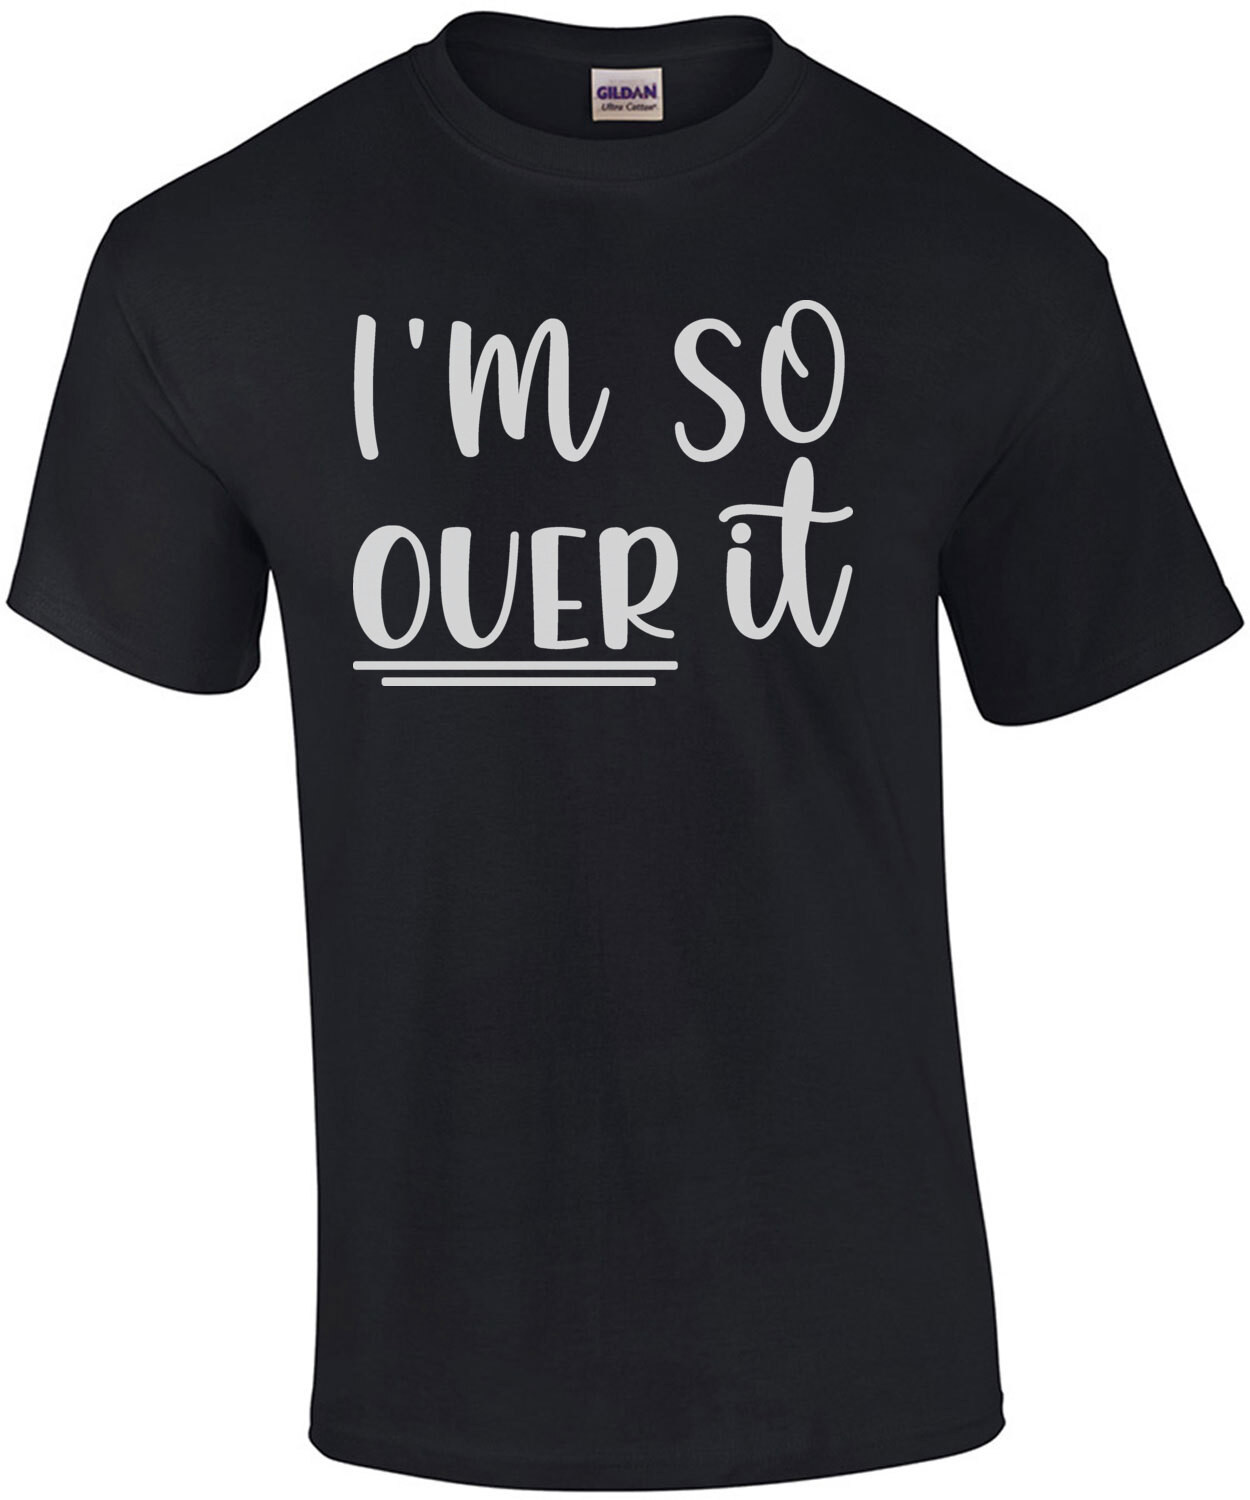 I'm so over it - funny ladies t-shirt